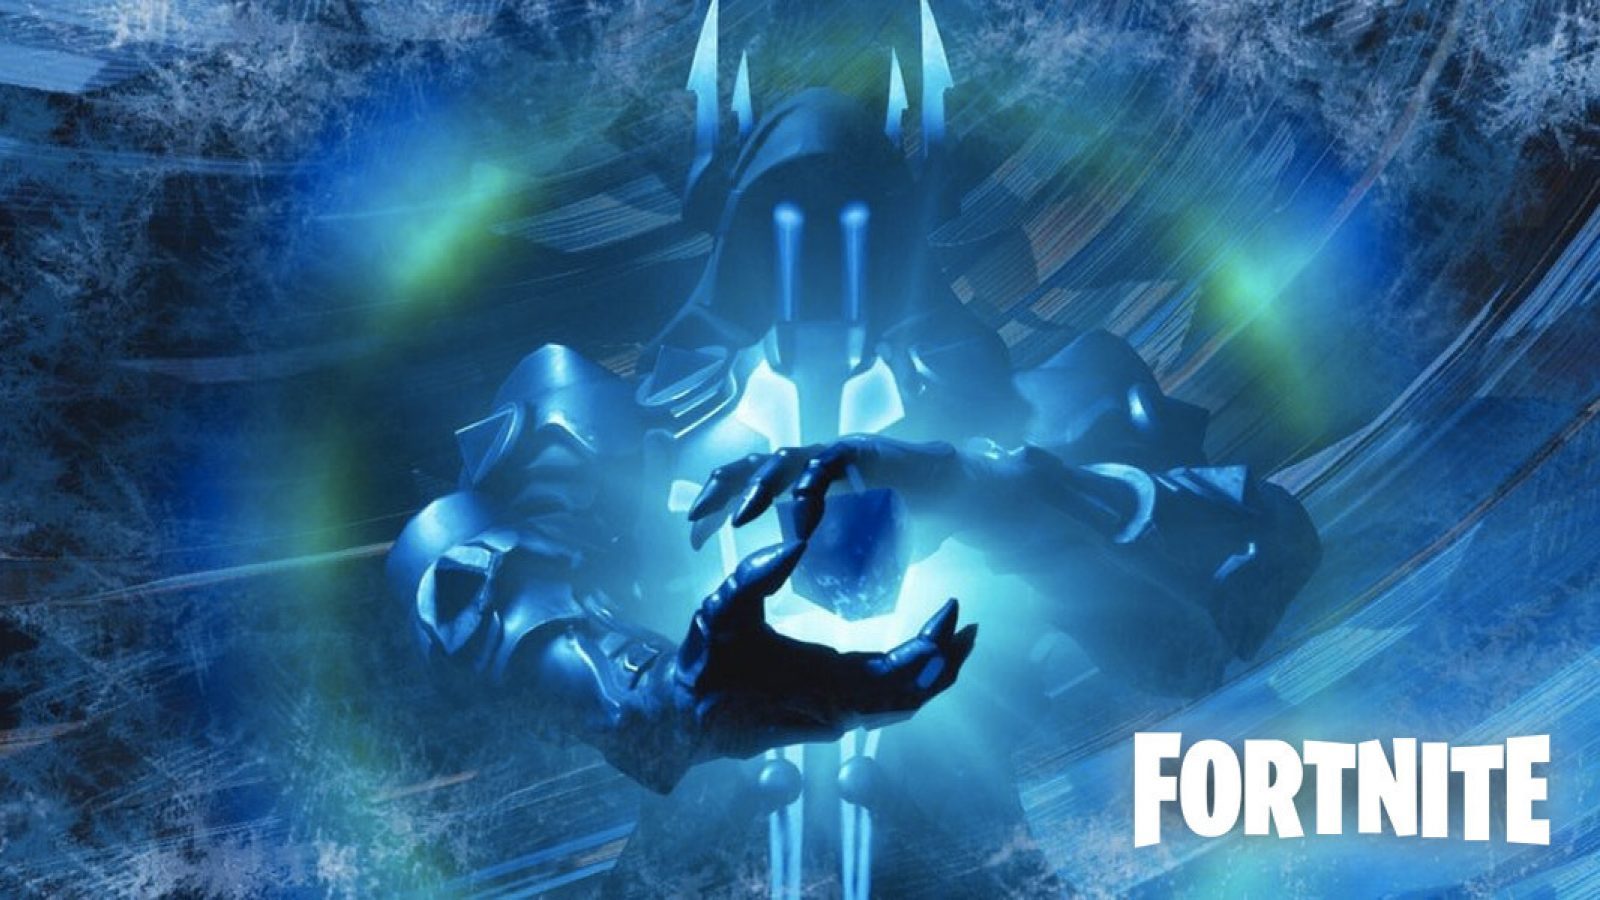 Free download fortnite ice storm event kicks off fox sports asia x for your desktop mobile tablet explore the ice king fortnite wallpapers the king of fighters wallpapers